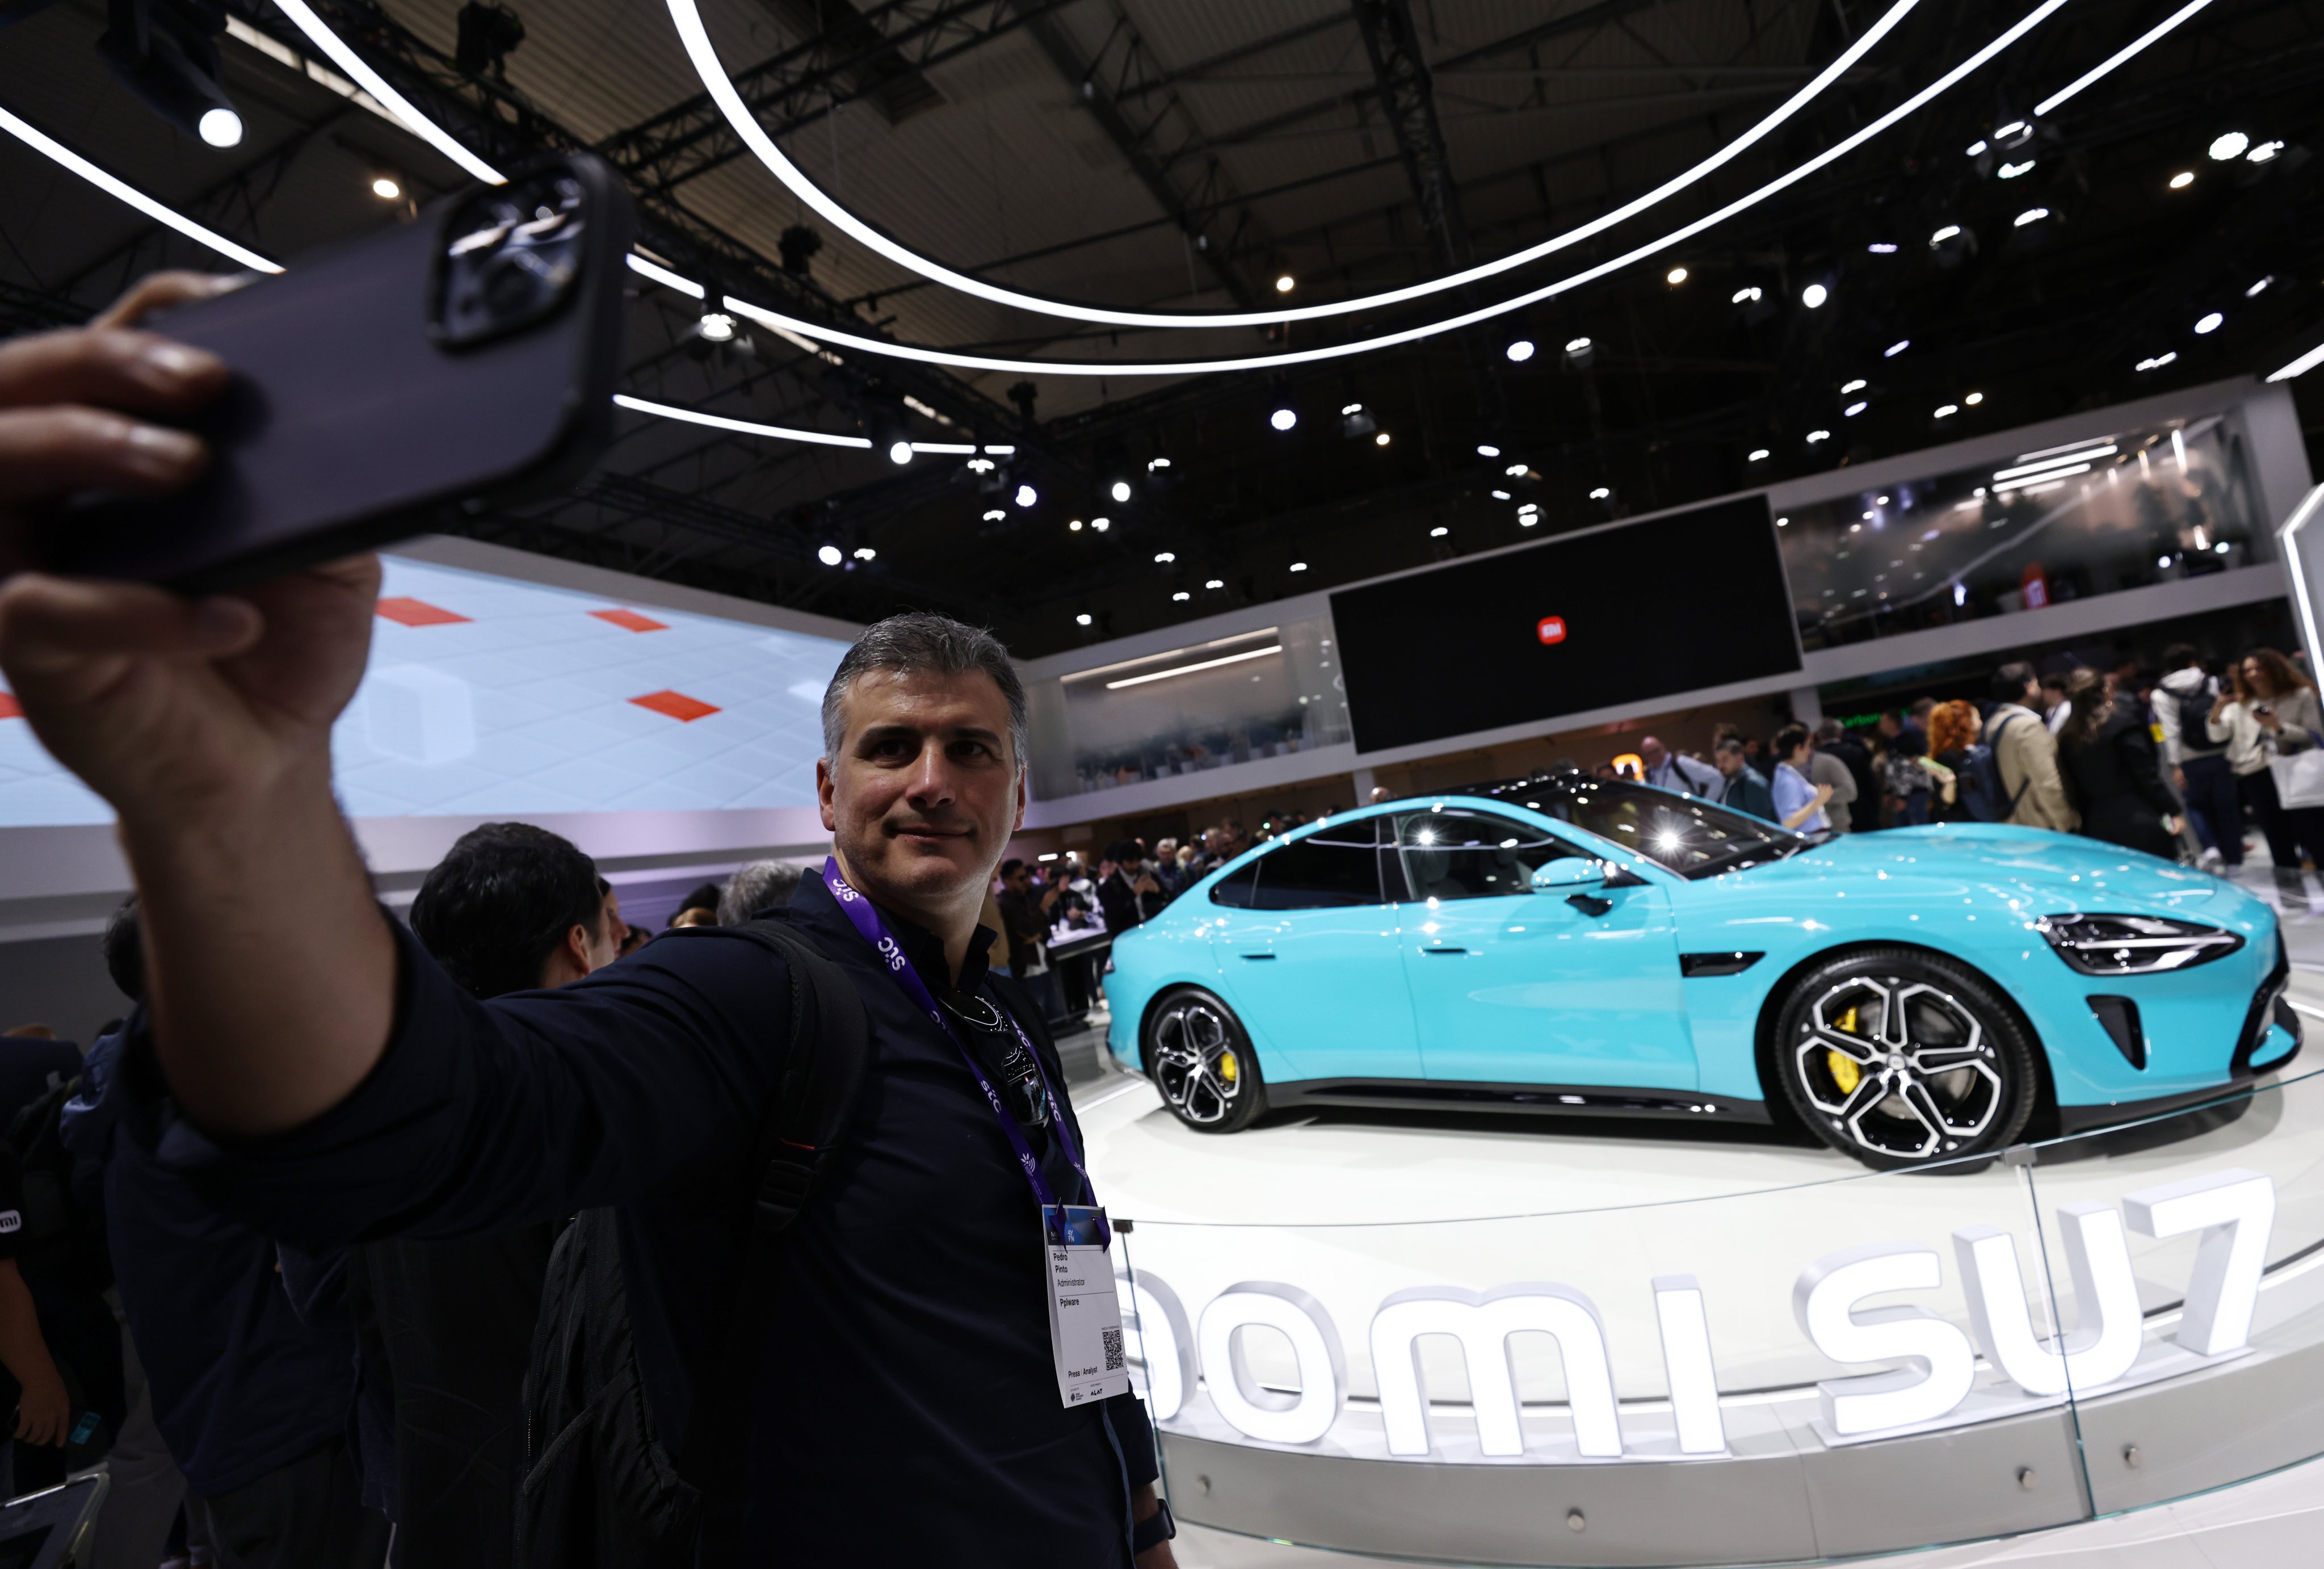 Xiaomi’s SU7 car is displayed at the Mobile World Congress in Barcelona, Spain, last month. Photo: Xinhua